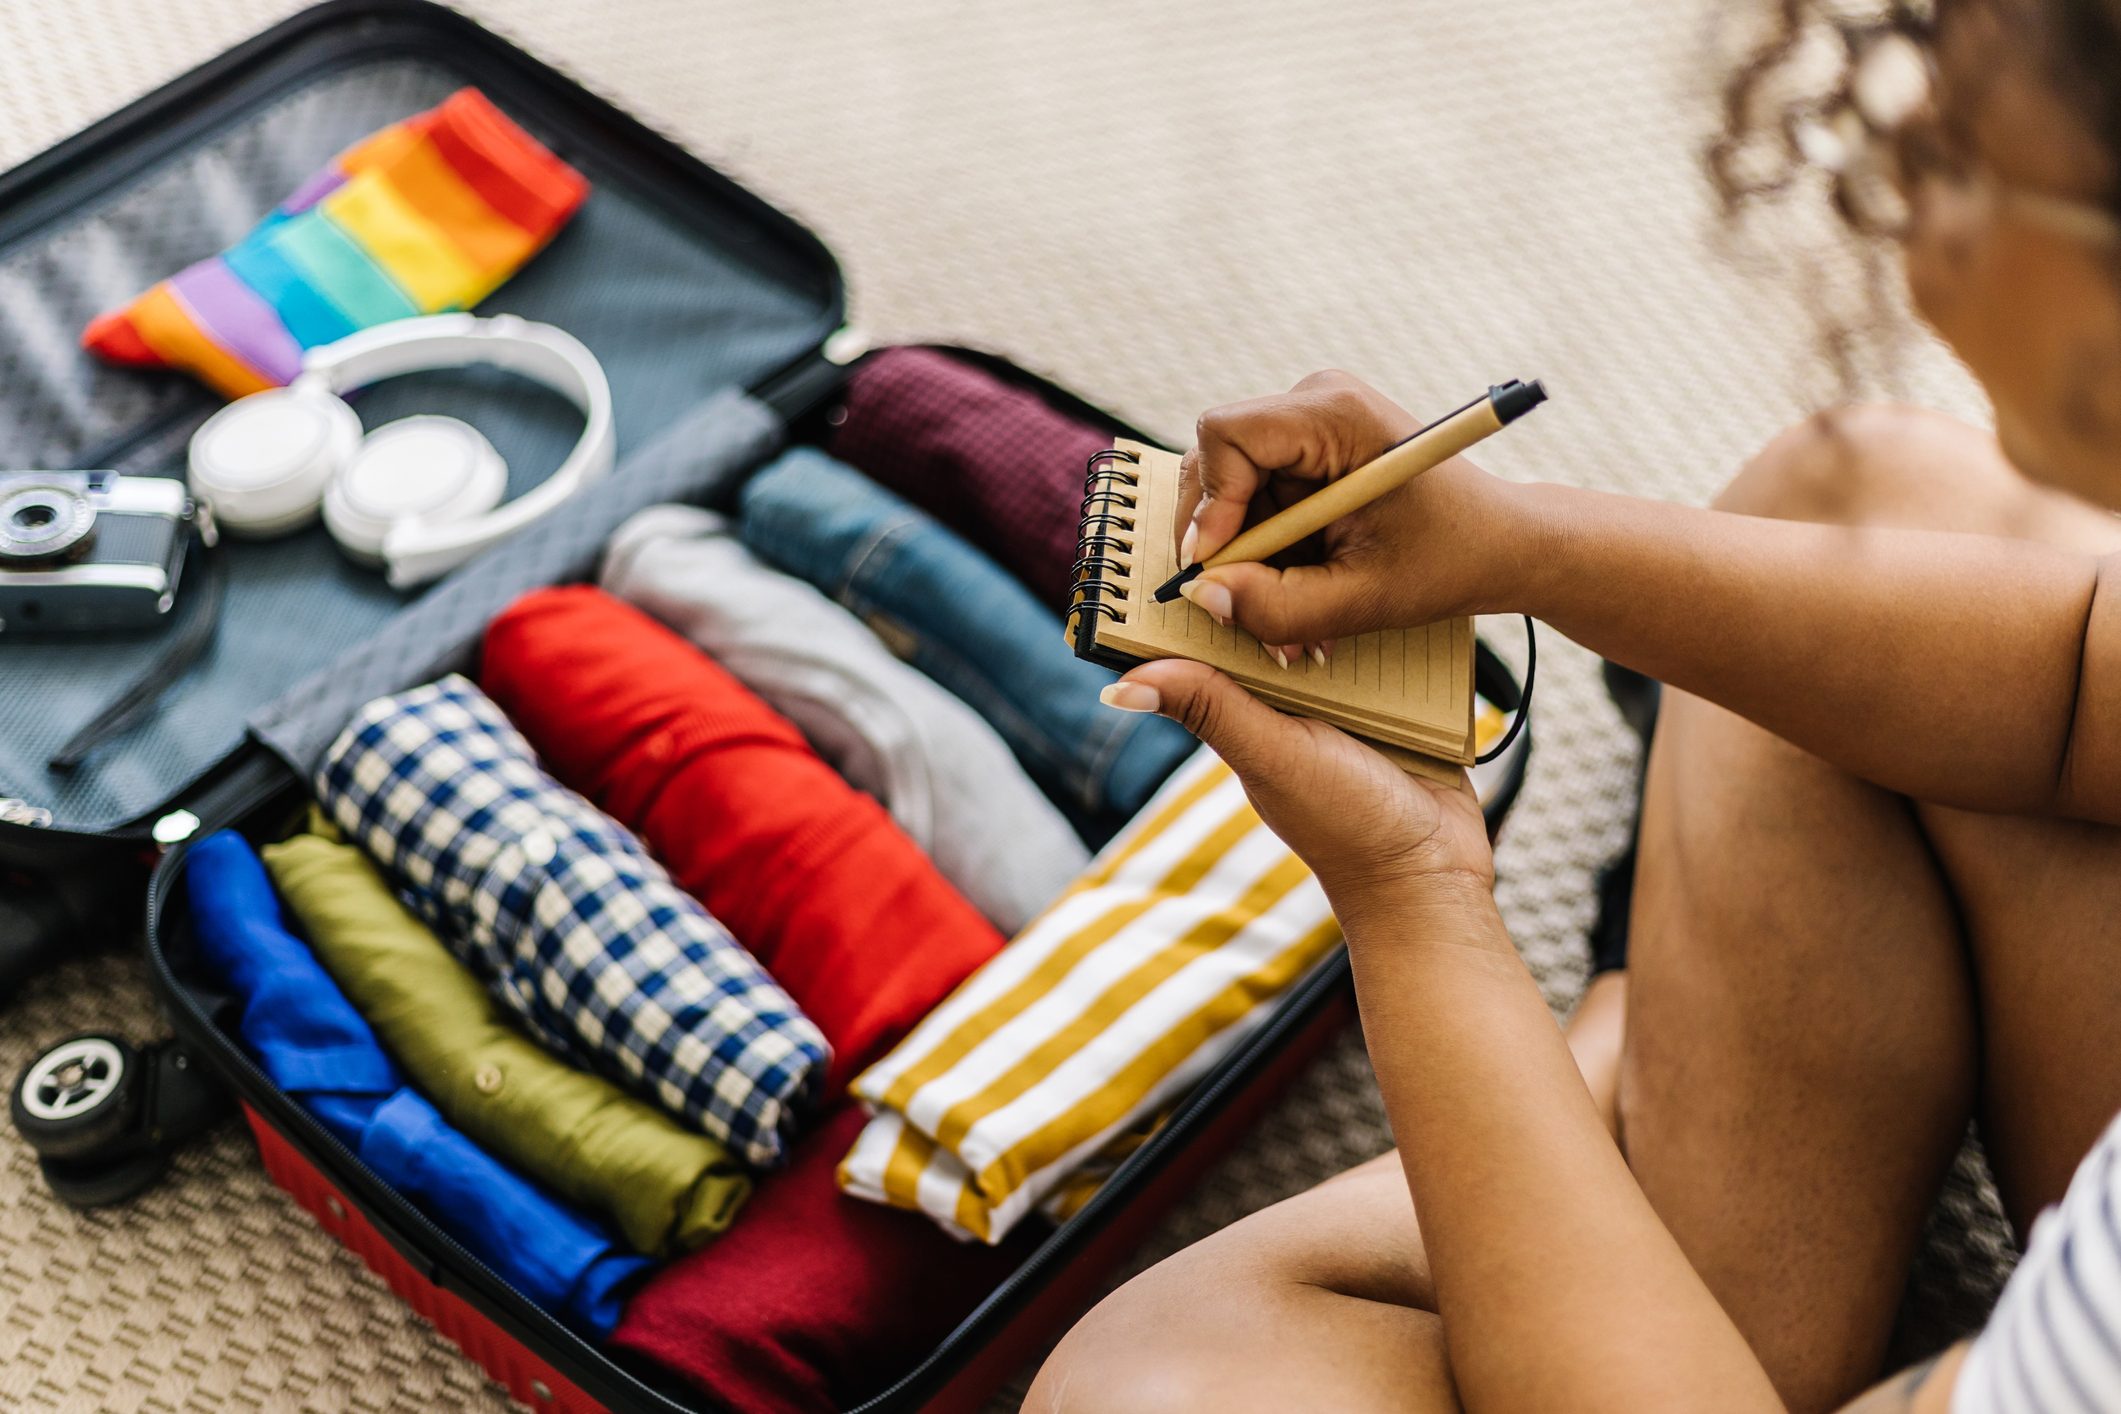 How To Choose the Right Sized Travel Bag for Any Trip